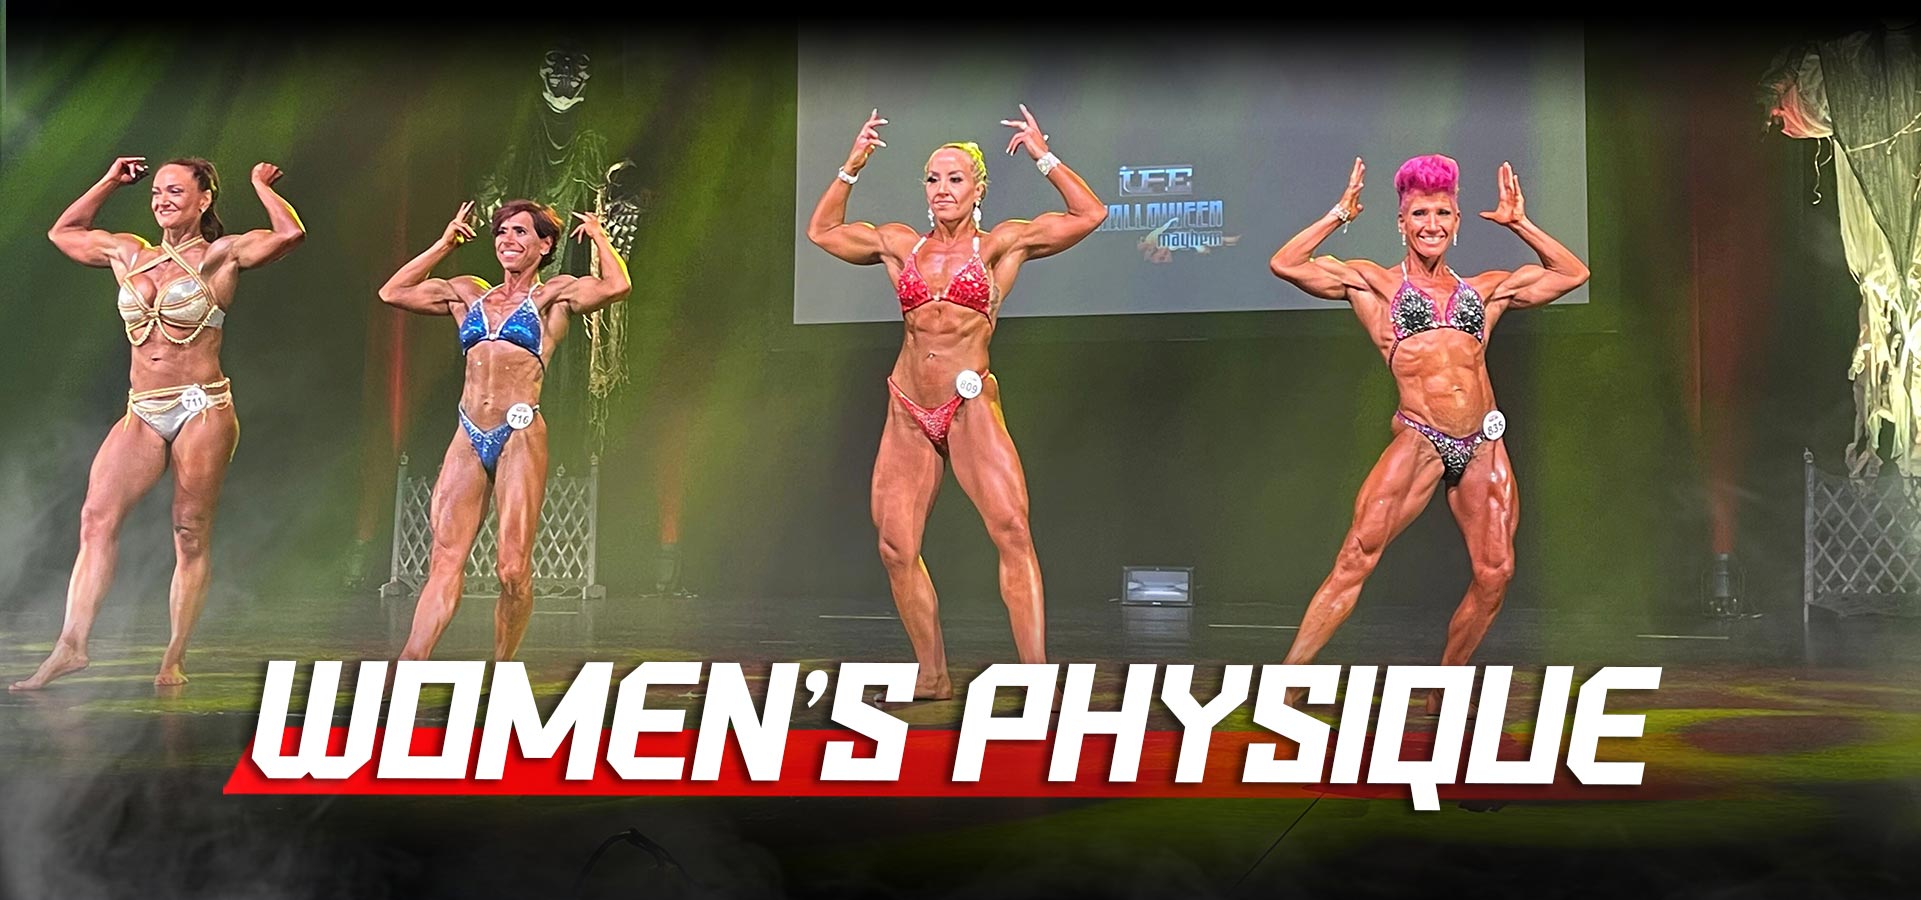 Womens Physique  Ultimate Fitness Events